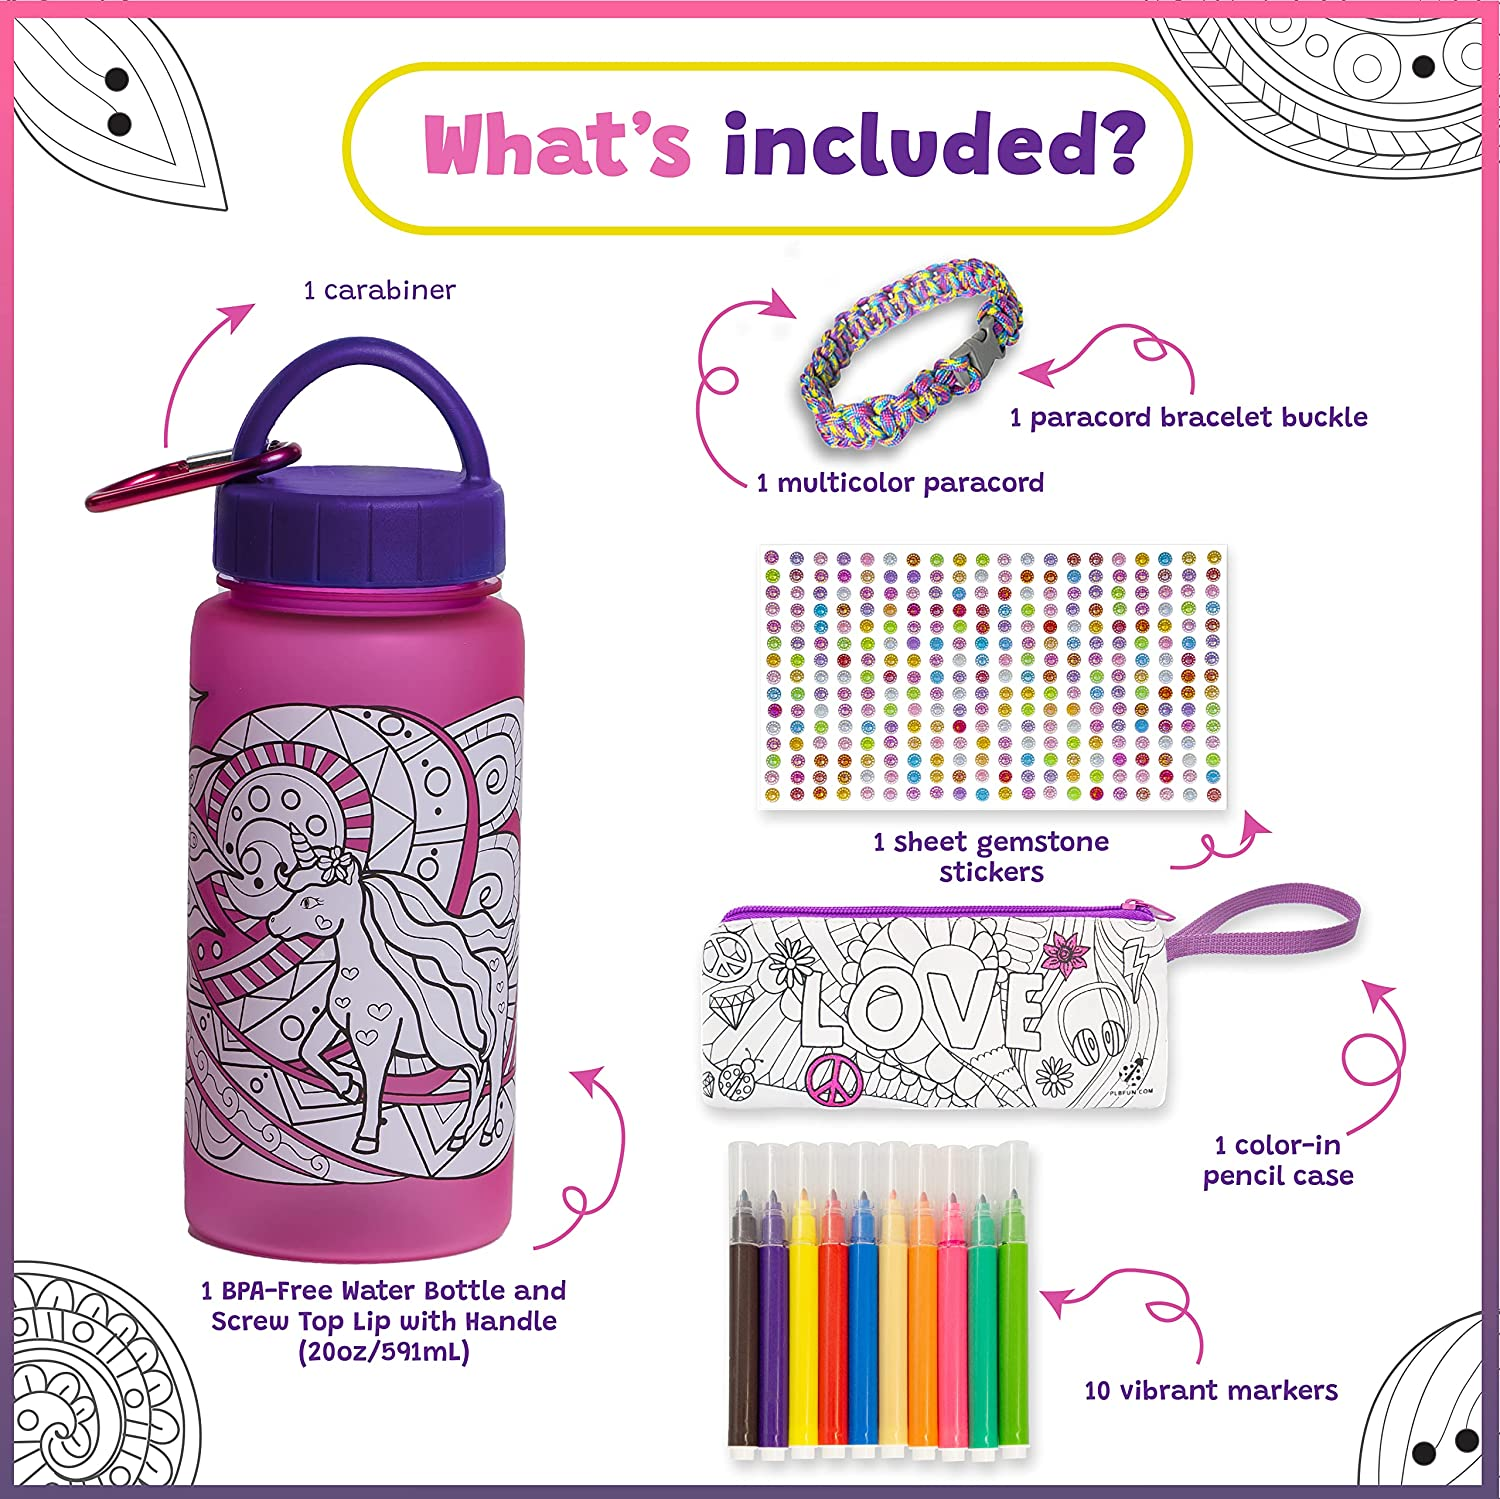 Purple Ladybug Decorate Your Own Water Bottle Craft Kit for Kid with Color  in Designs - Birthday Gifts for Girls Age 4 +, Travel Gift Idea for Tween  Girl, Fun Arts and